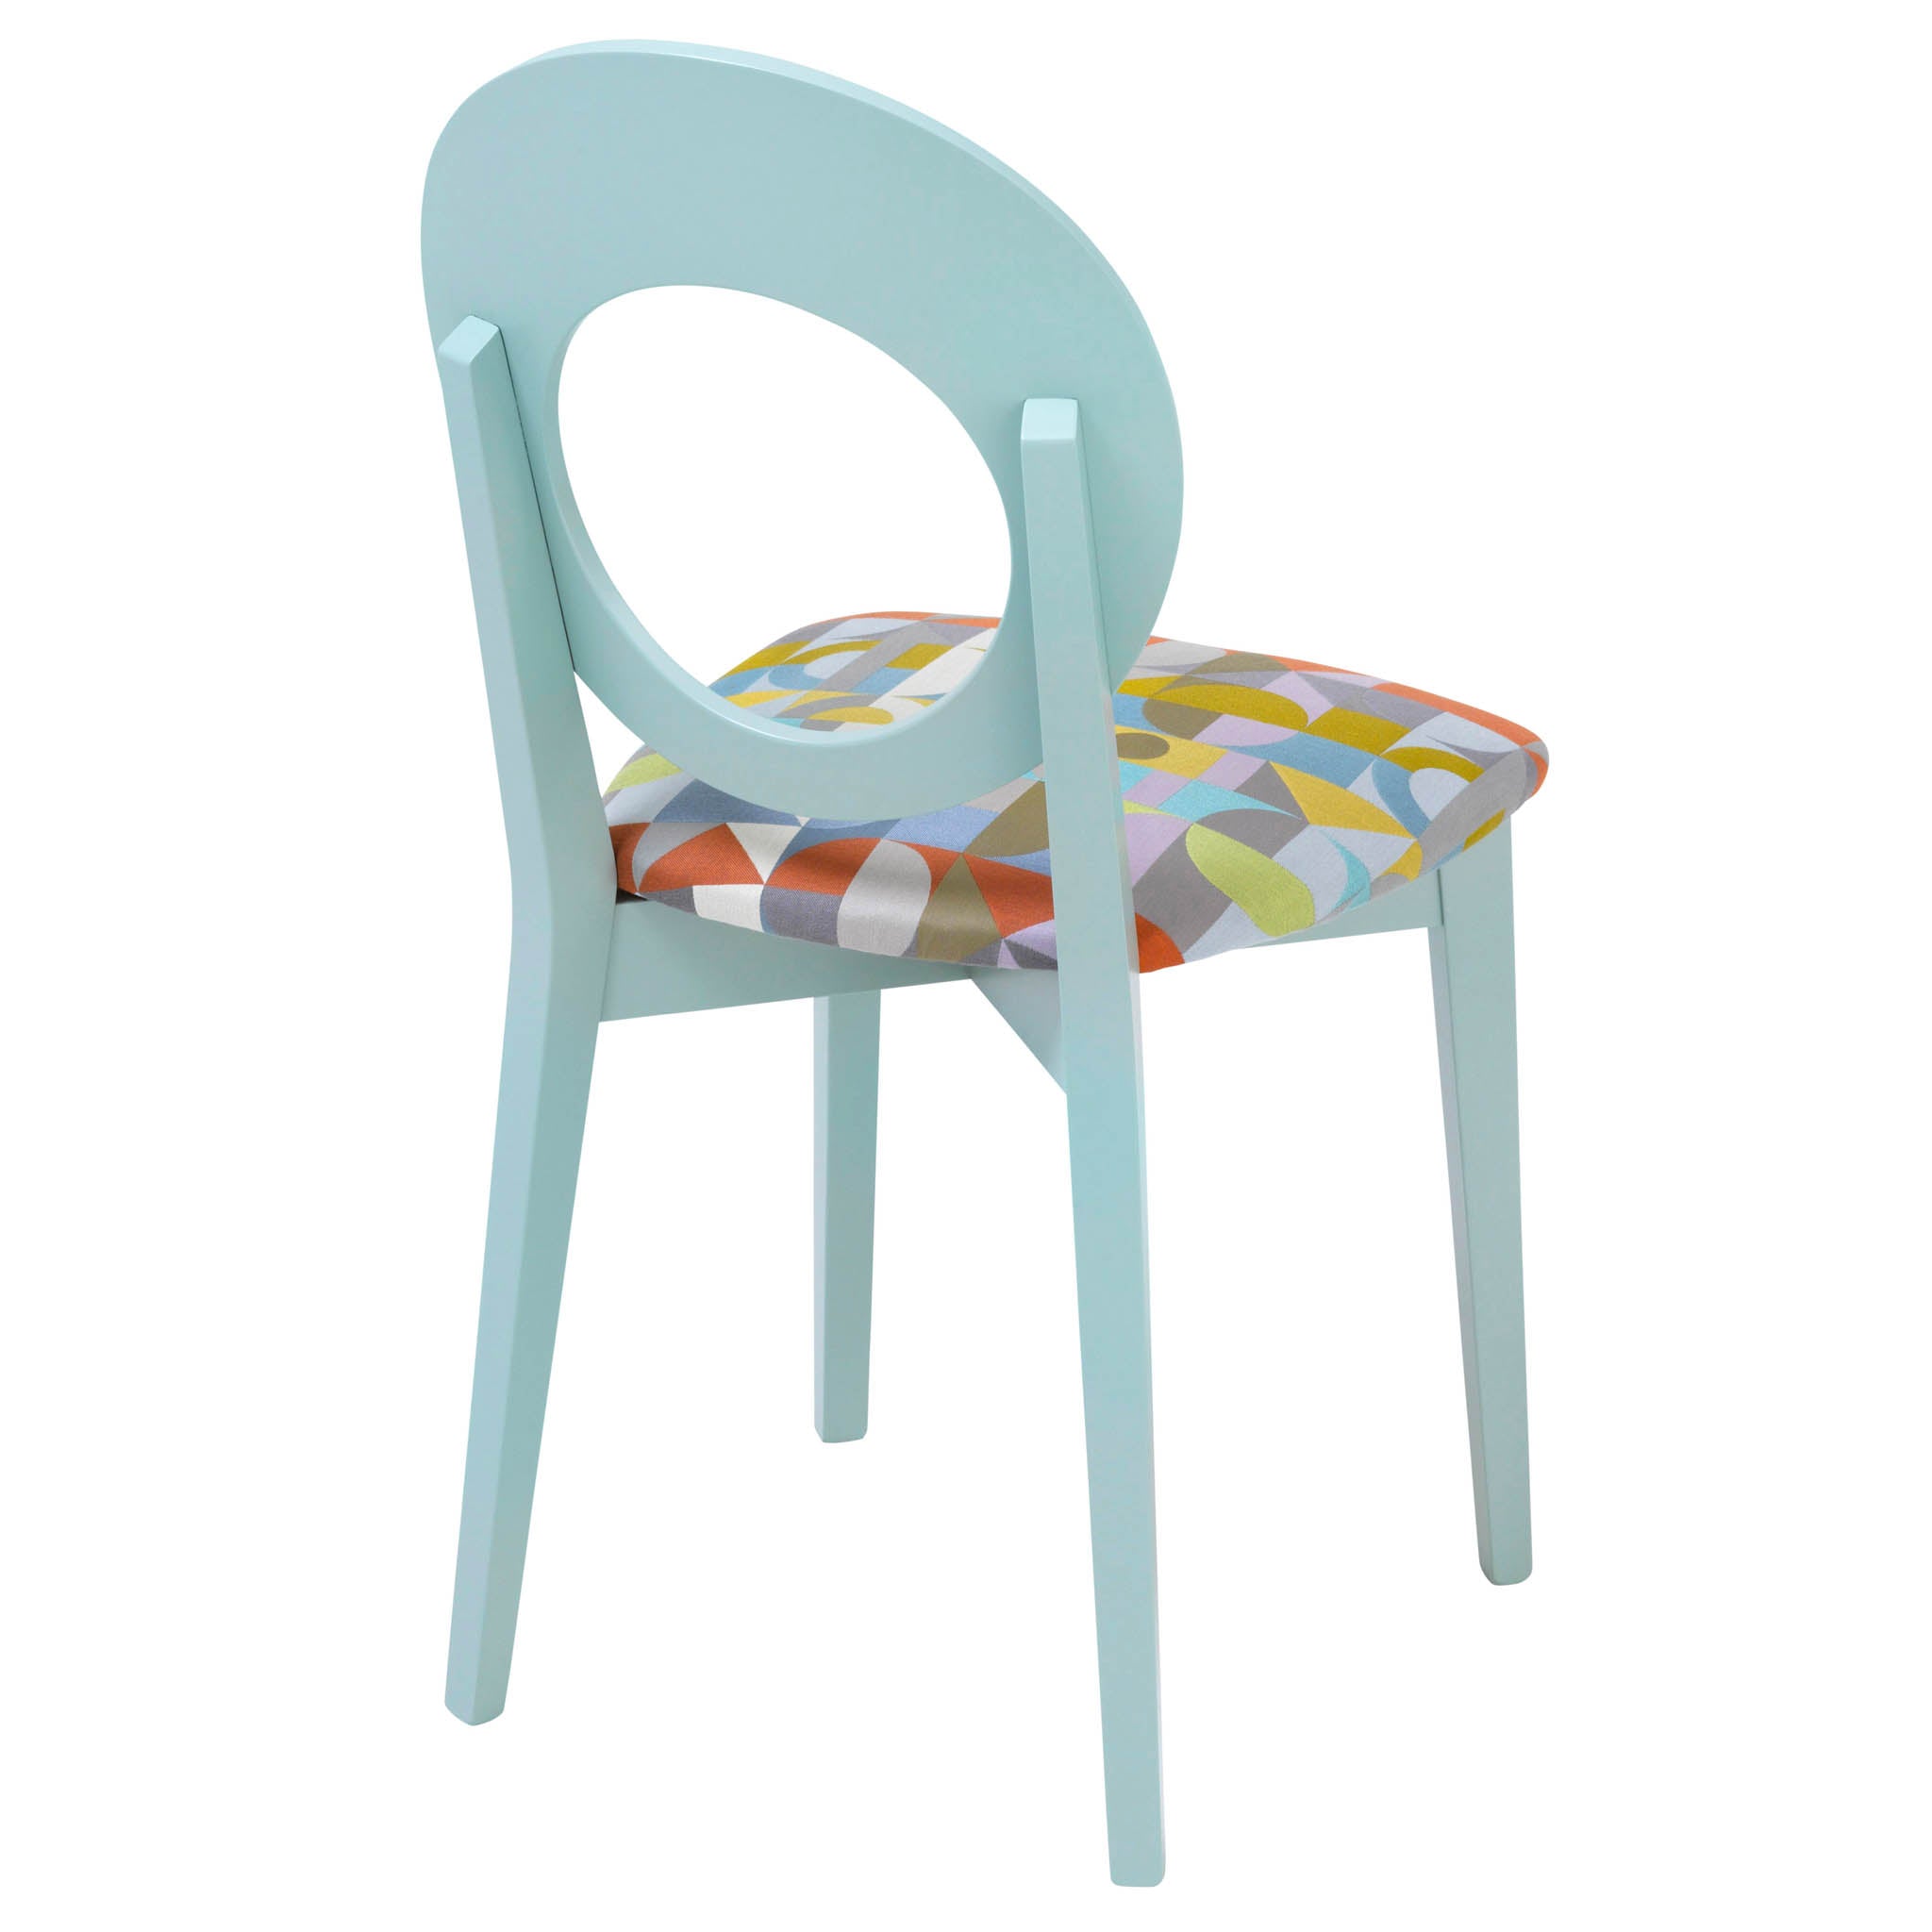 Aqua Chloe Dining Chair upholstered in Motown from Margo Selby